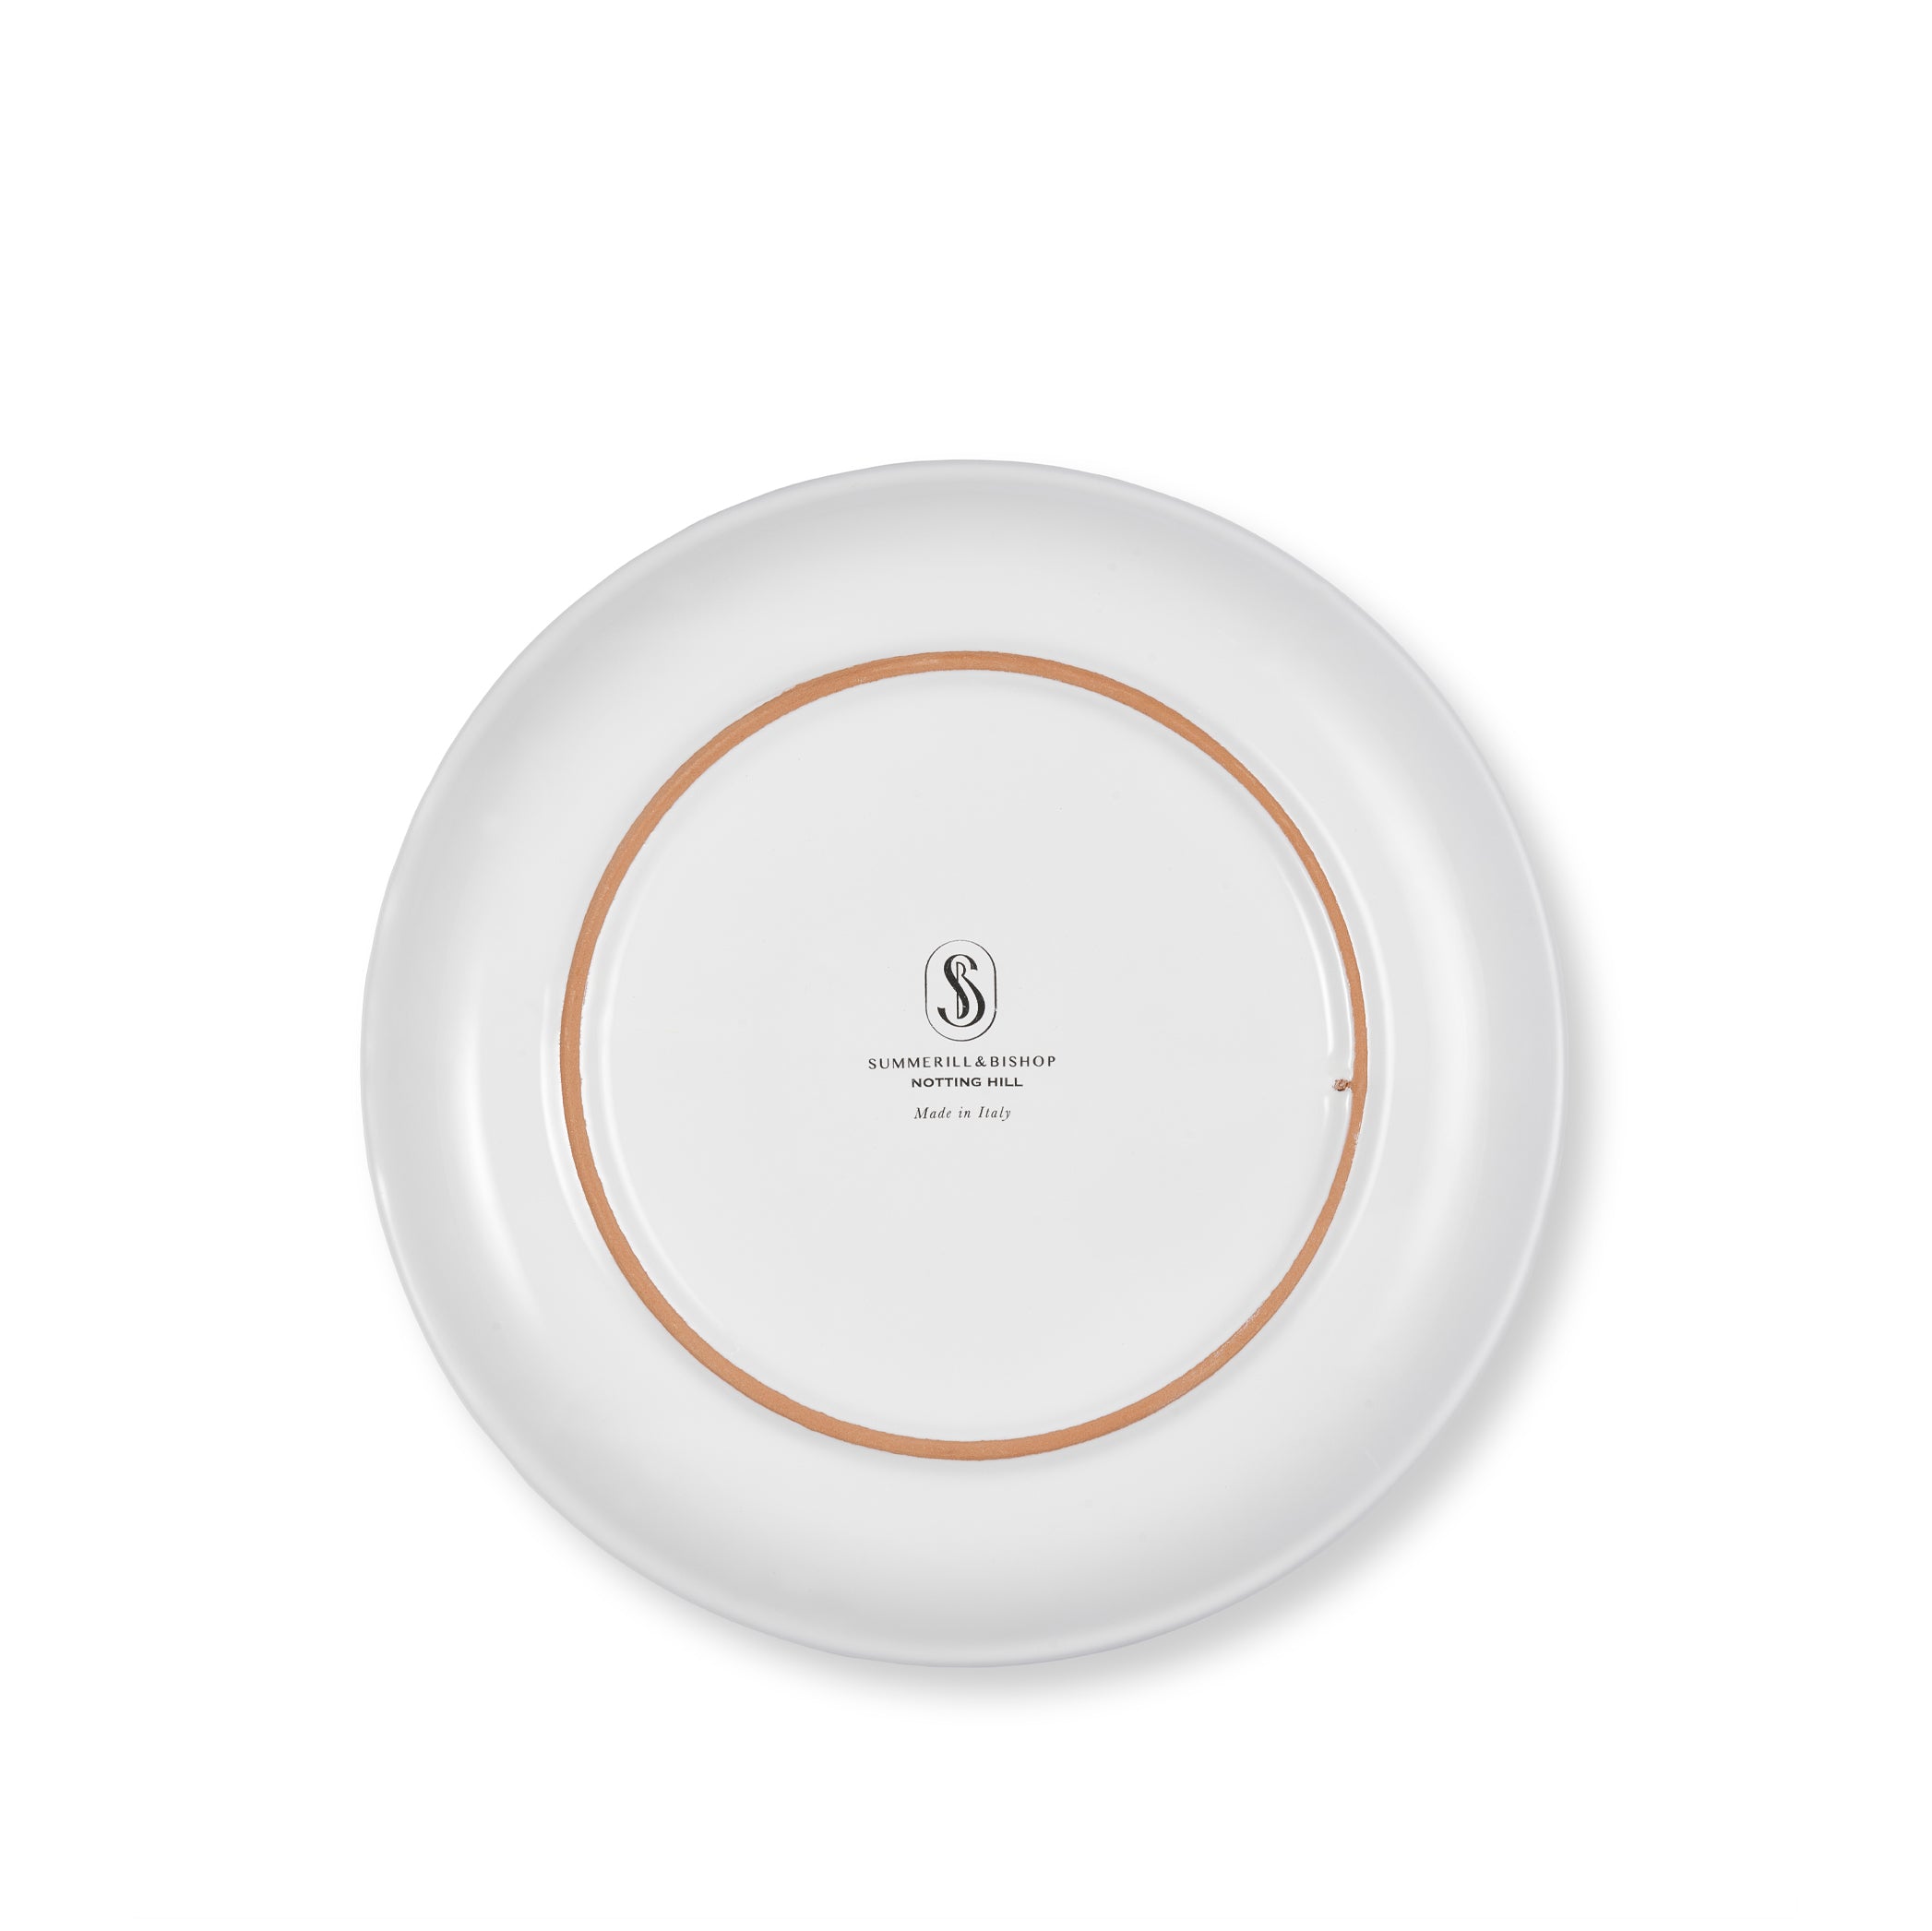 S&B Decorated Dinner Plate in White With Pastel Pink Pattern, 26cm